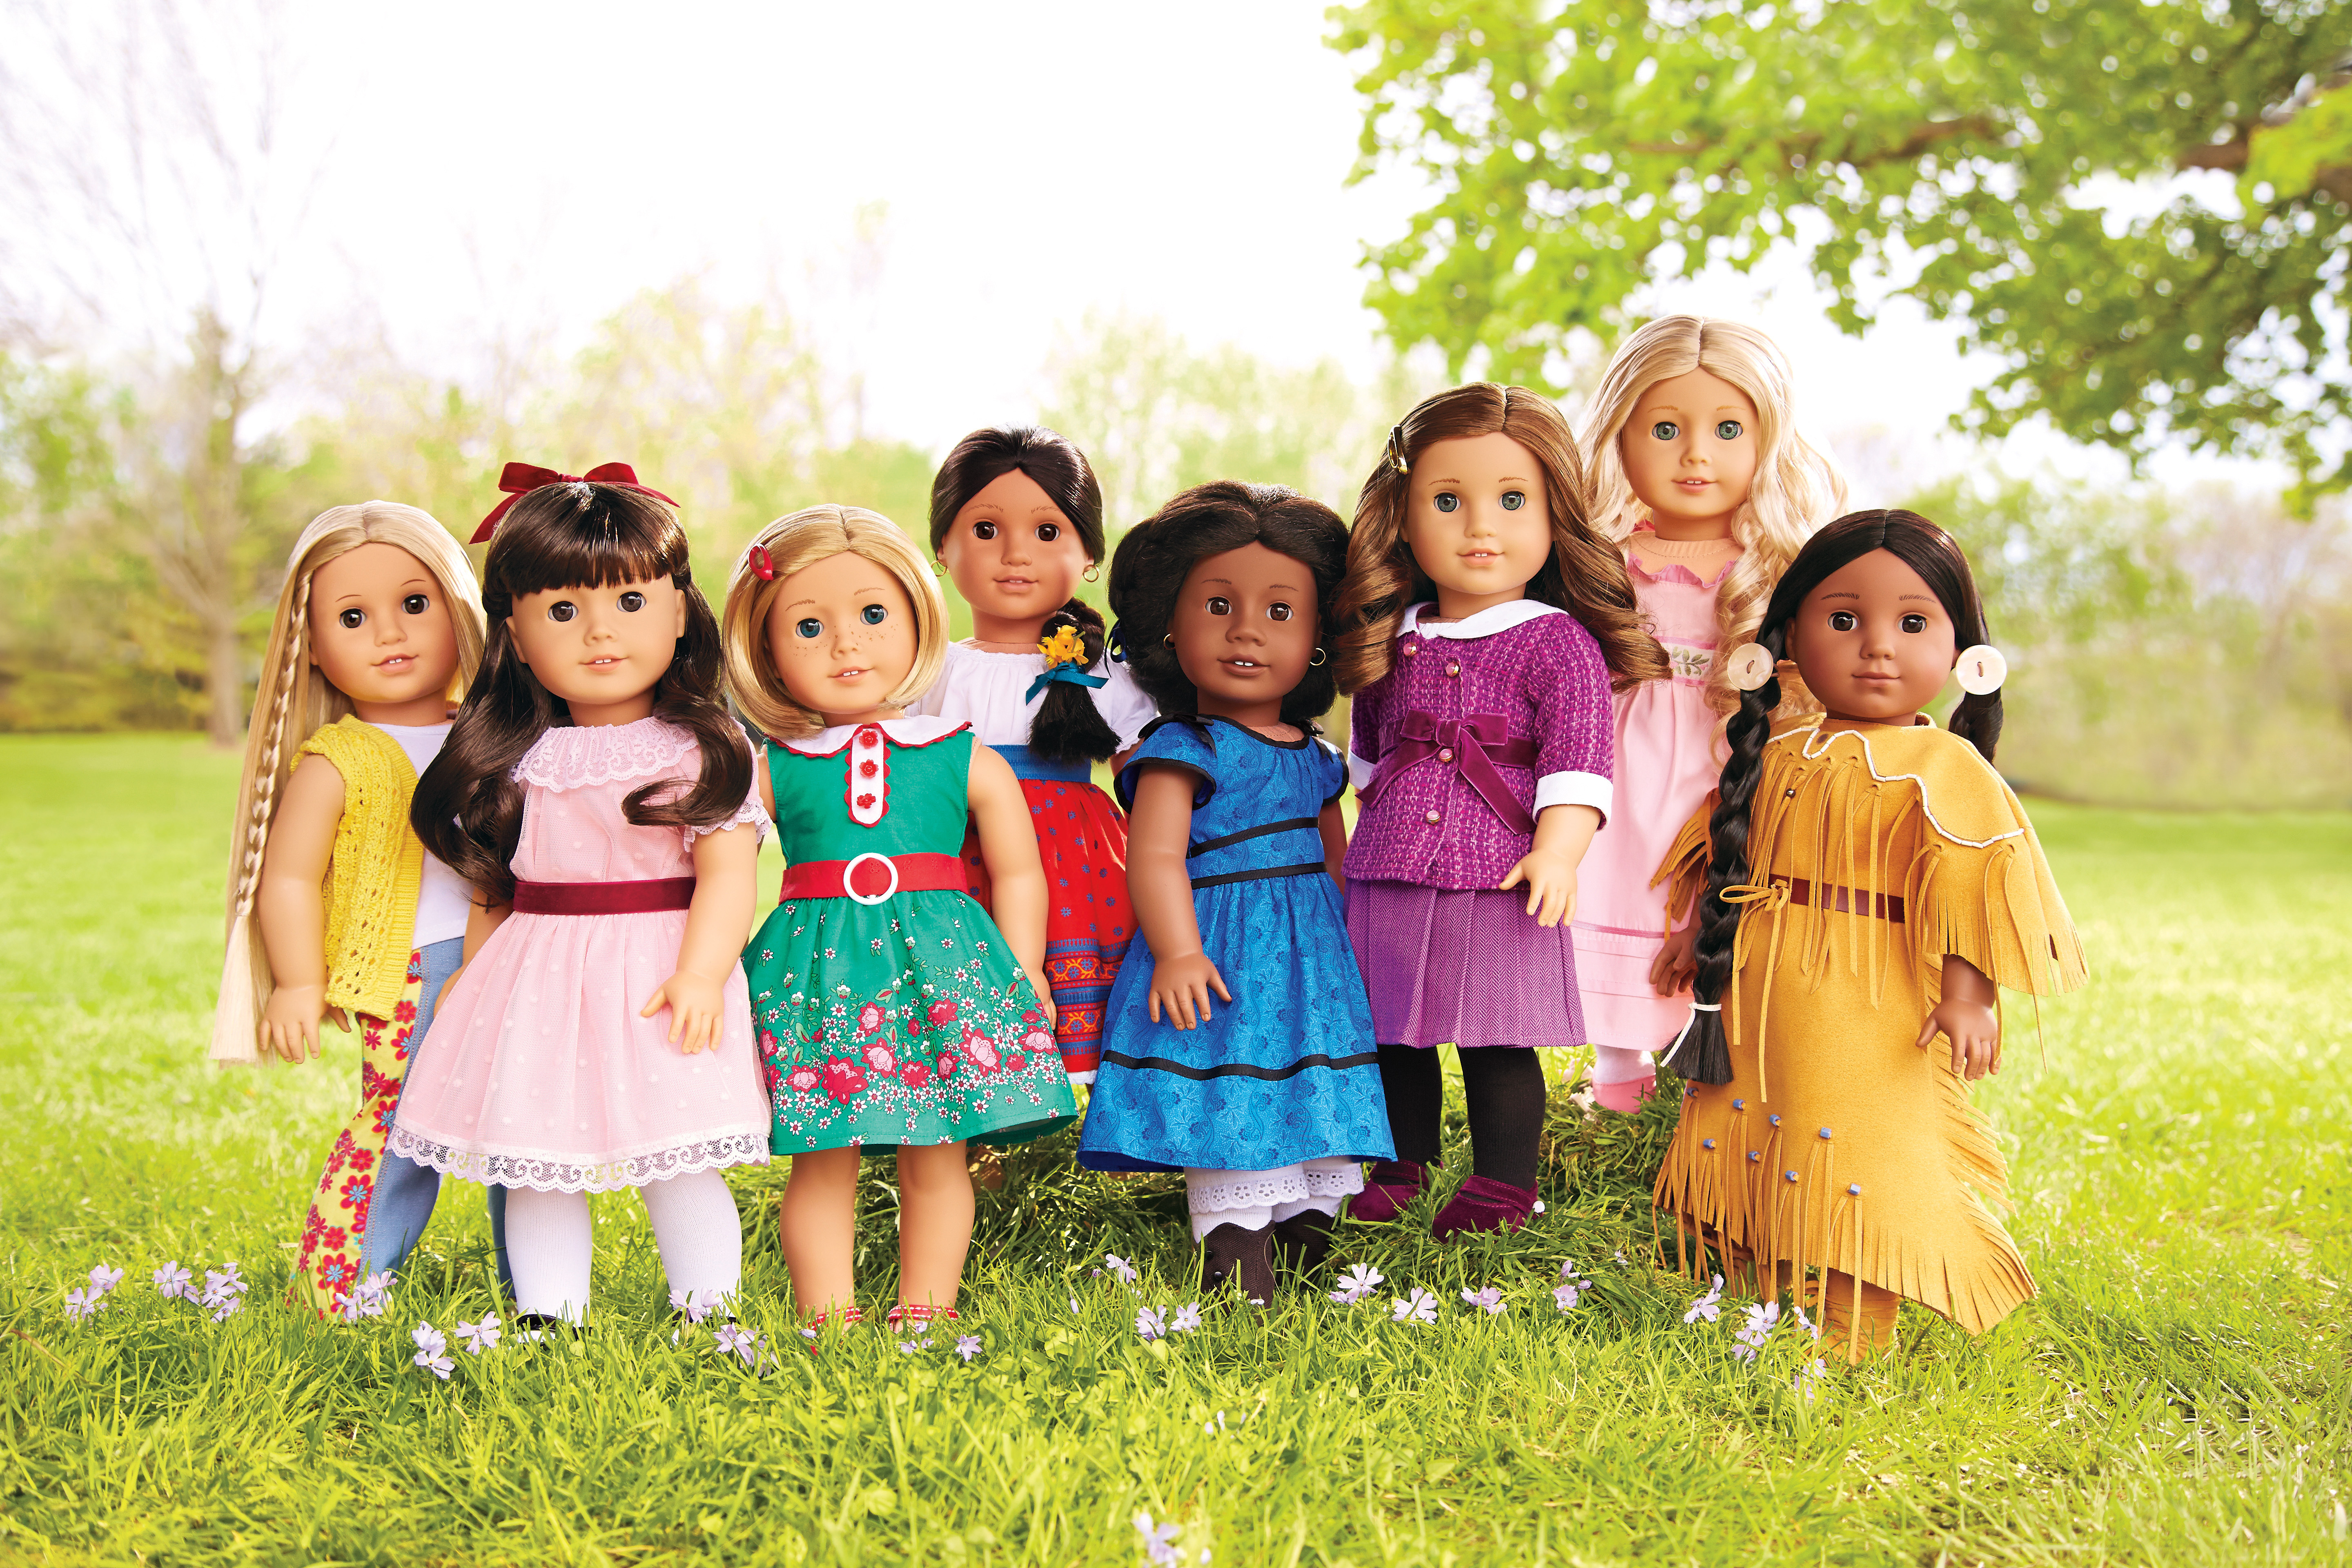 American Girl Dolls Are Making a Comeback, Thanks to These Memes